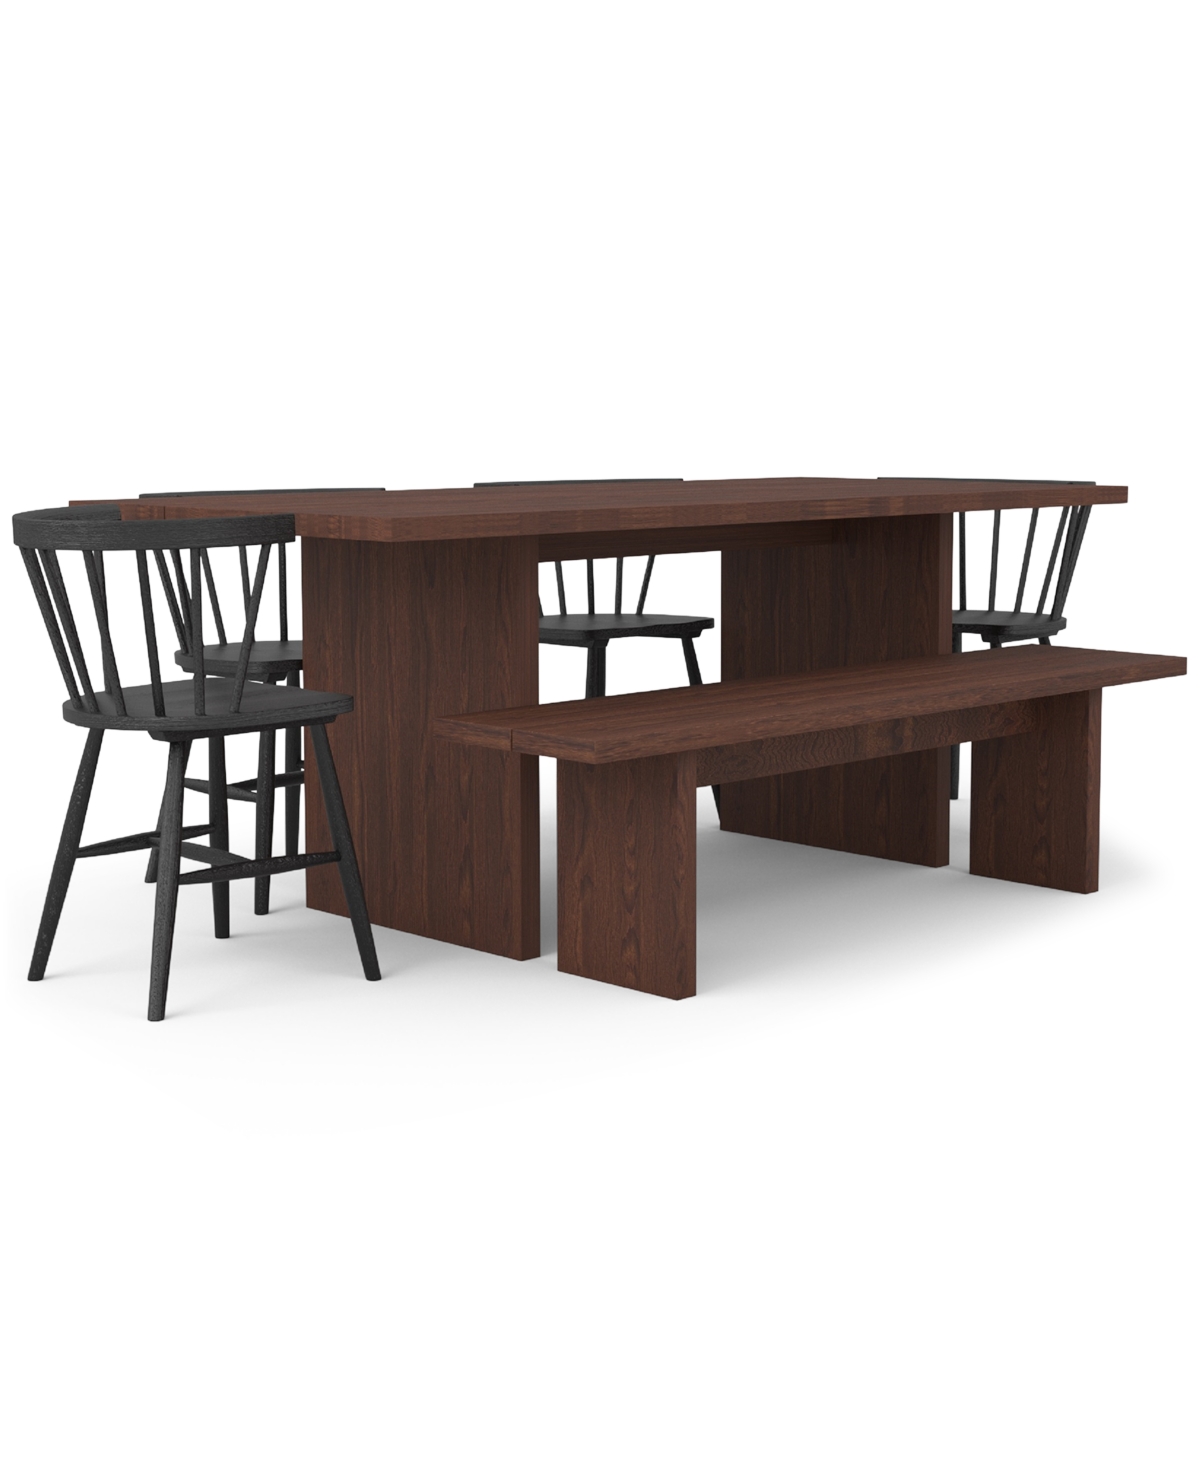 Eq3 Closeout! Bernia 6pc Dining Set (table + 4 Dining Chairs + Bench) In No Color